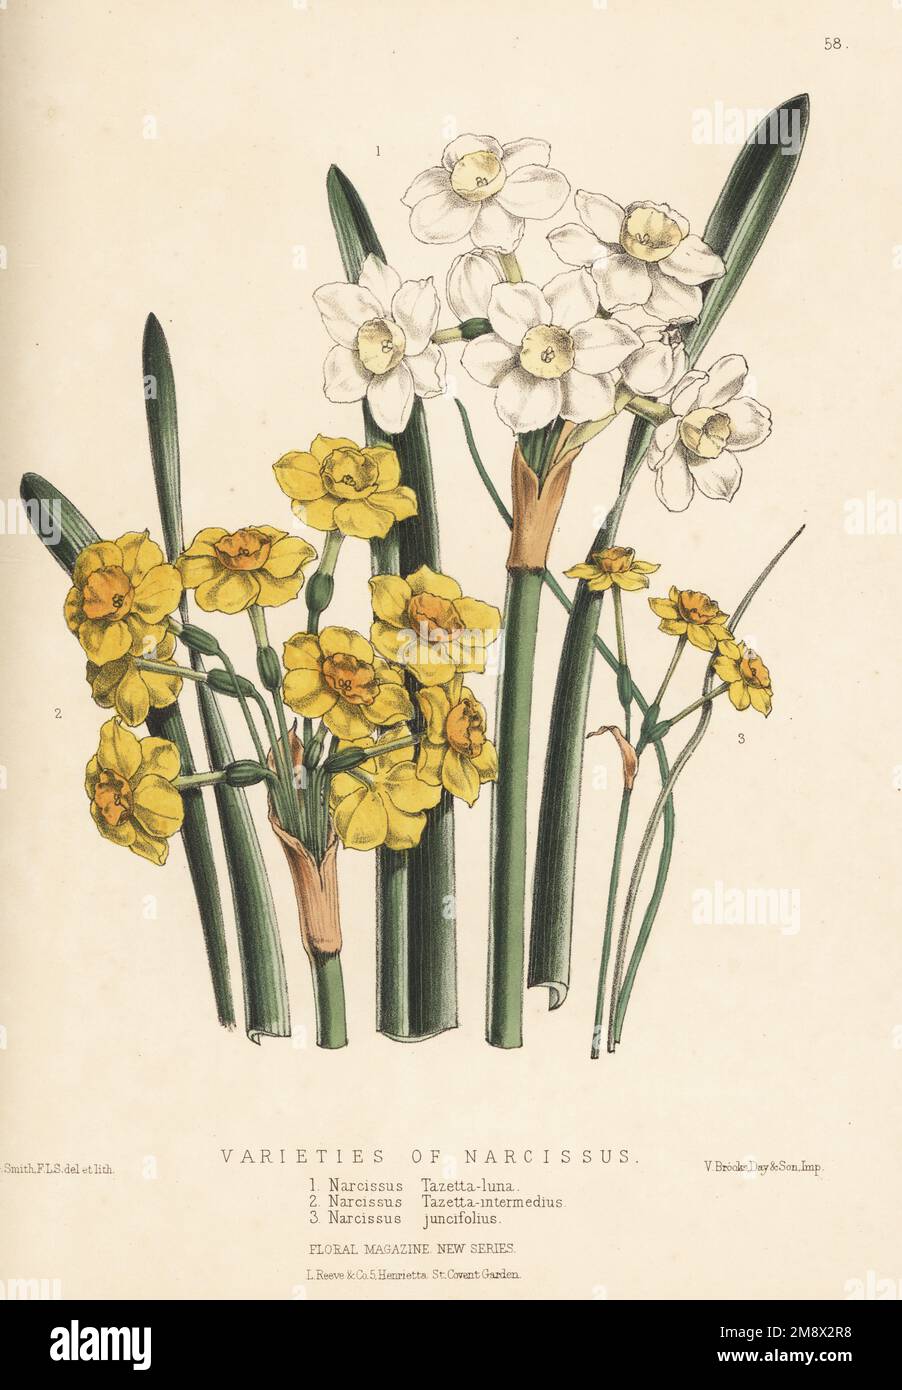 Varieties of daffodils, Narcissus species, raised by Barr and Sugden nursery. Paperwhite varieties, Narcissus tazetta-luna, Narcissus tazetta-intermedius, and jonquil or rush daffodil, Narcissus jonquilla (as Narcissus juncifolius). Handcolored botanical illustration drawn and lithographed by Worthington George Smith from Henry Honywood Dombrain's Floral Magazine, New Series, Volume 2, L. Reeve, London, 1873. Lithograph printed  by Vincent Brooks, Day & Son. Stock Photo